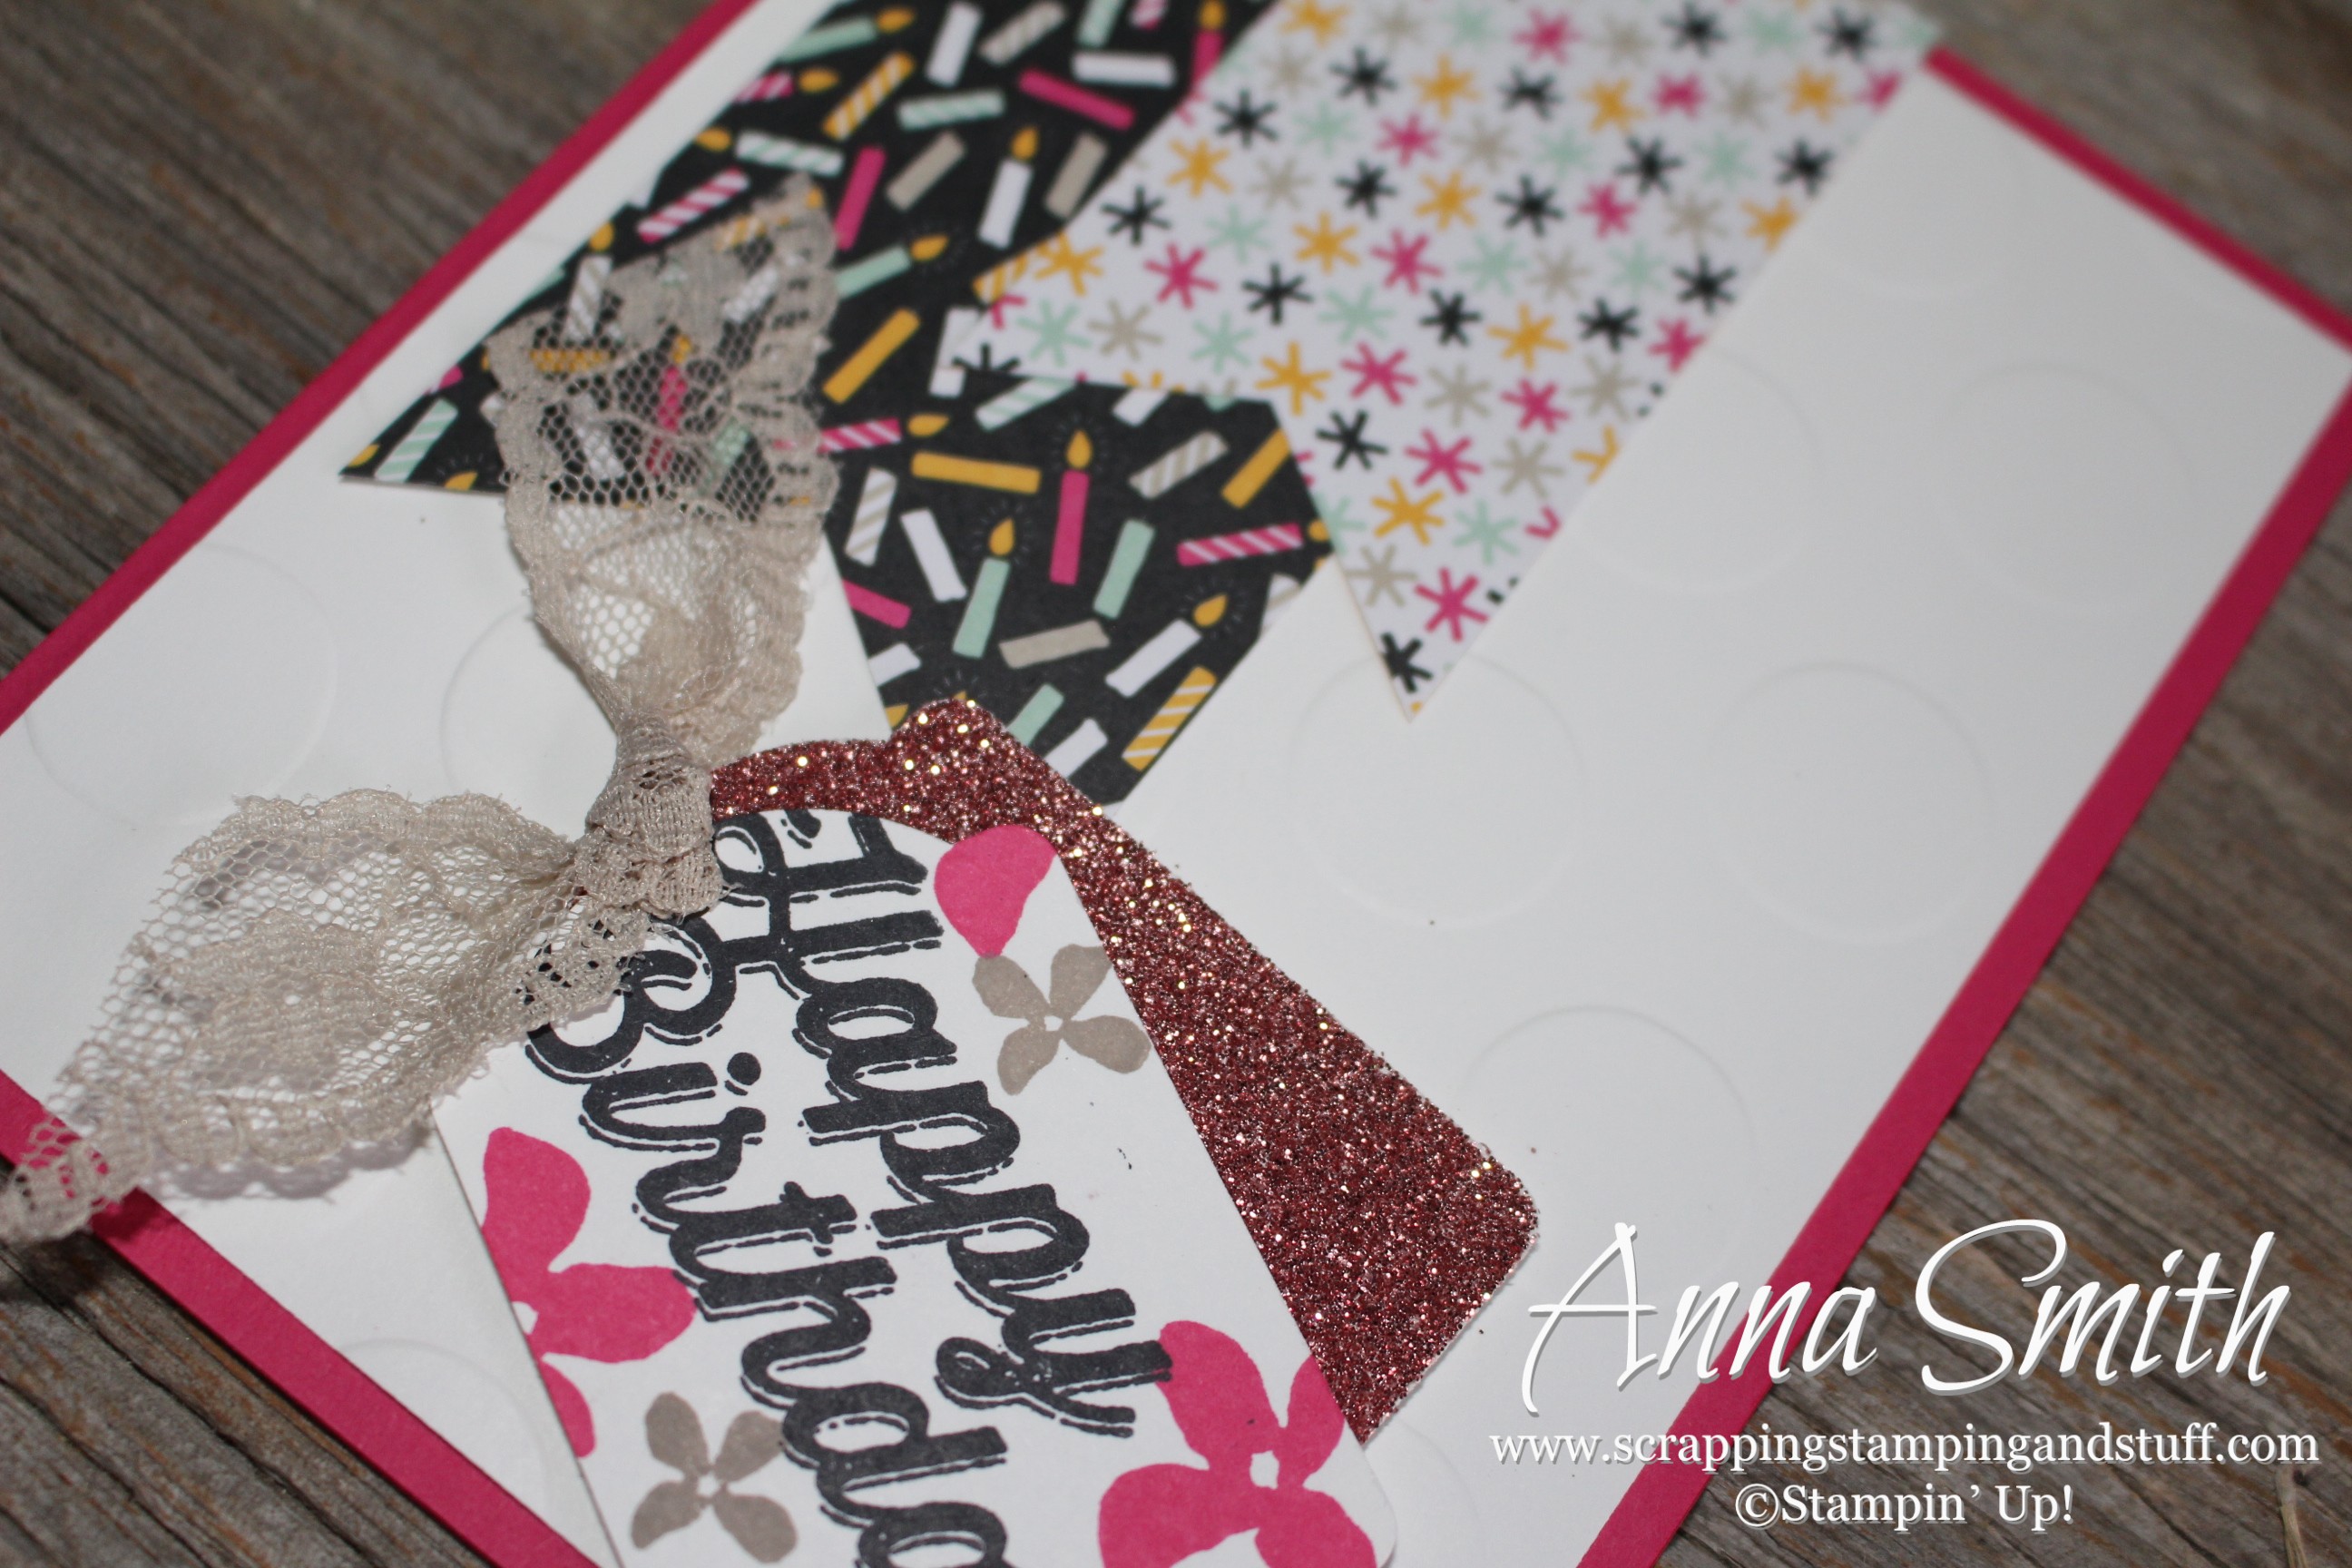 It’s My Party Birthday Card and Stamp Set Giveaway!